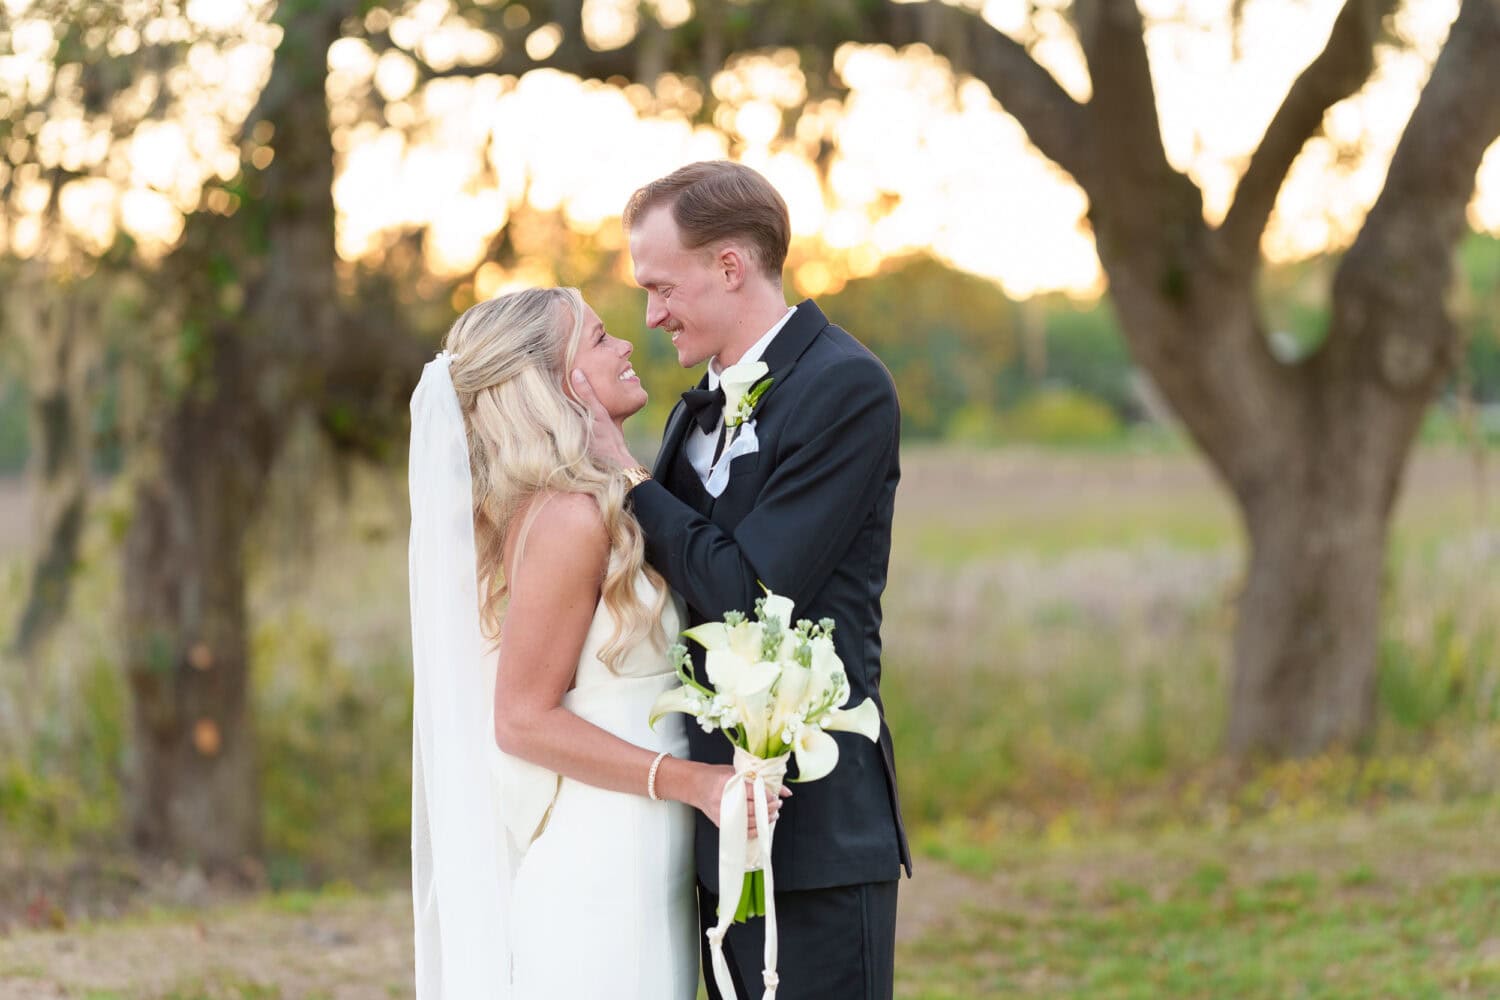 Pulling bride in for a kiss - Pawleys Plantation